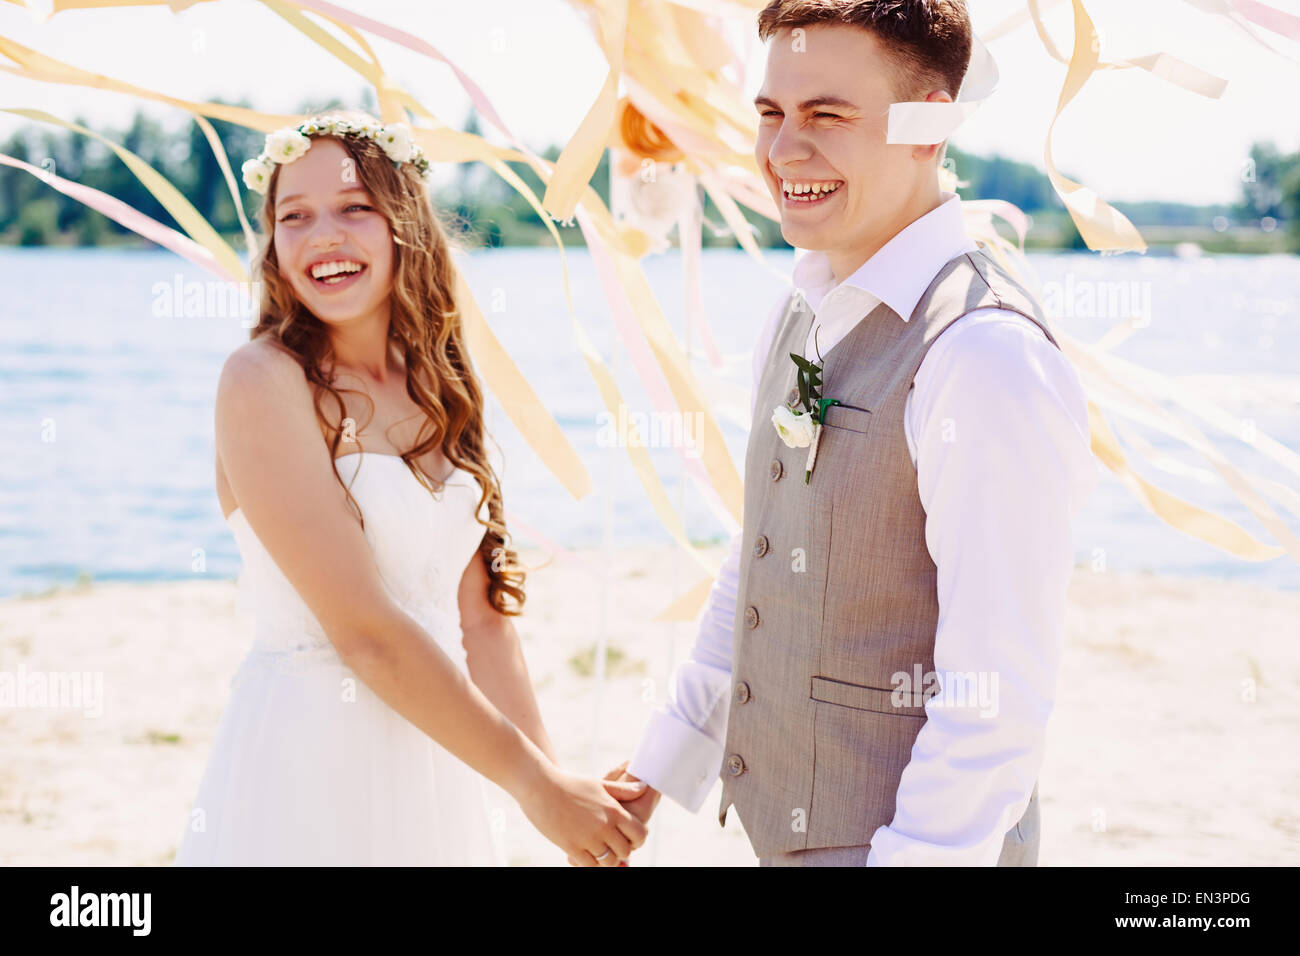 Happy wedding couple laughing and holding hands. Ceremony on open air. Selective focus on bride. Stock Photo